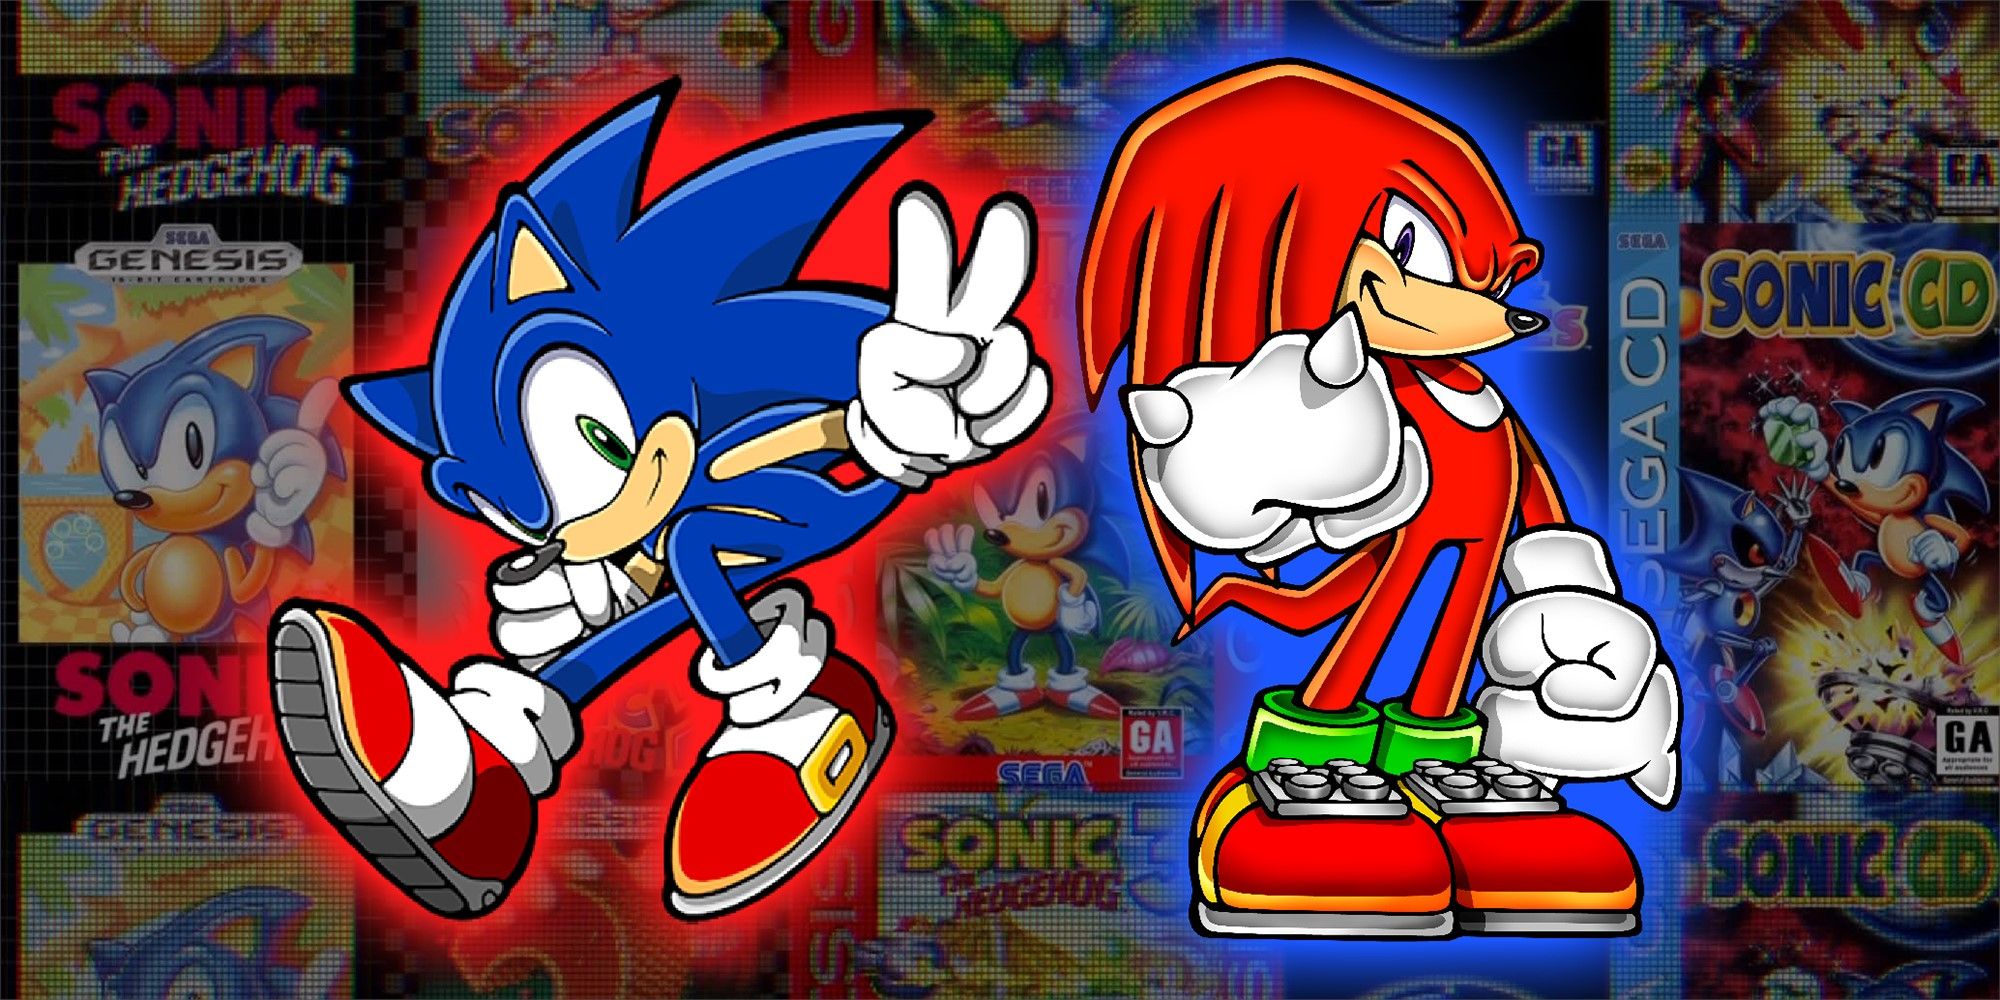 SONIC 3 HYPE — A photo for either the Knuckles Series or Sonic